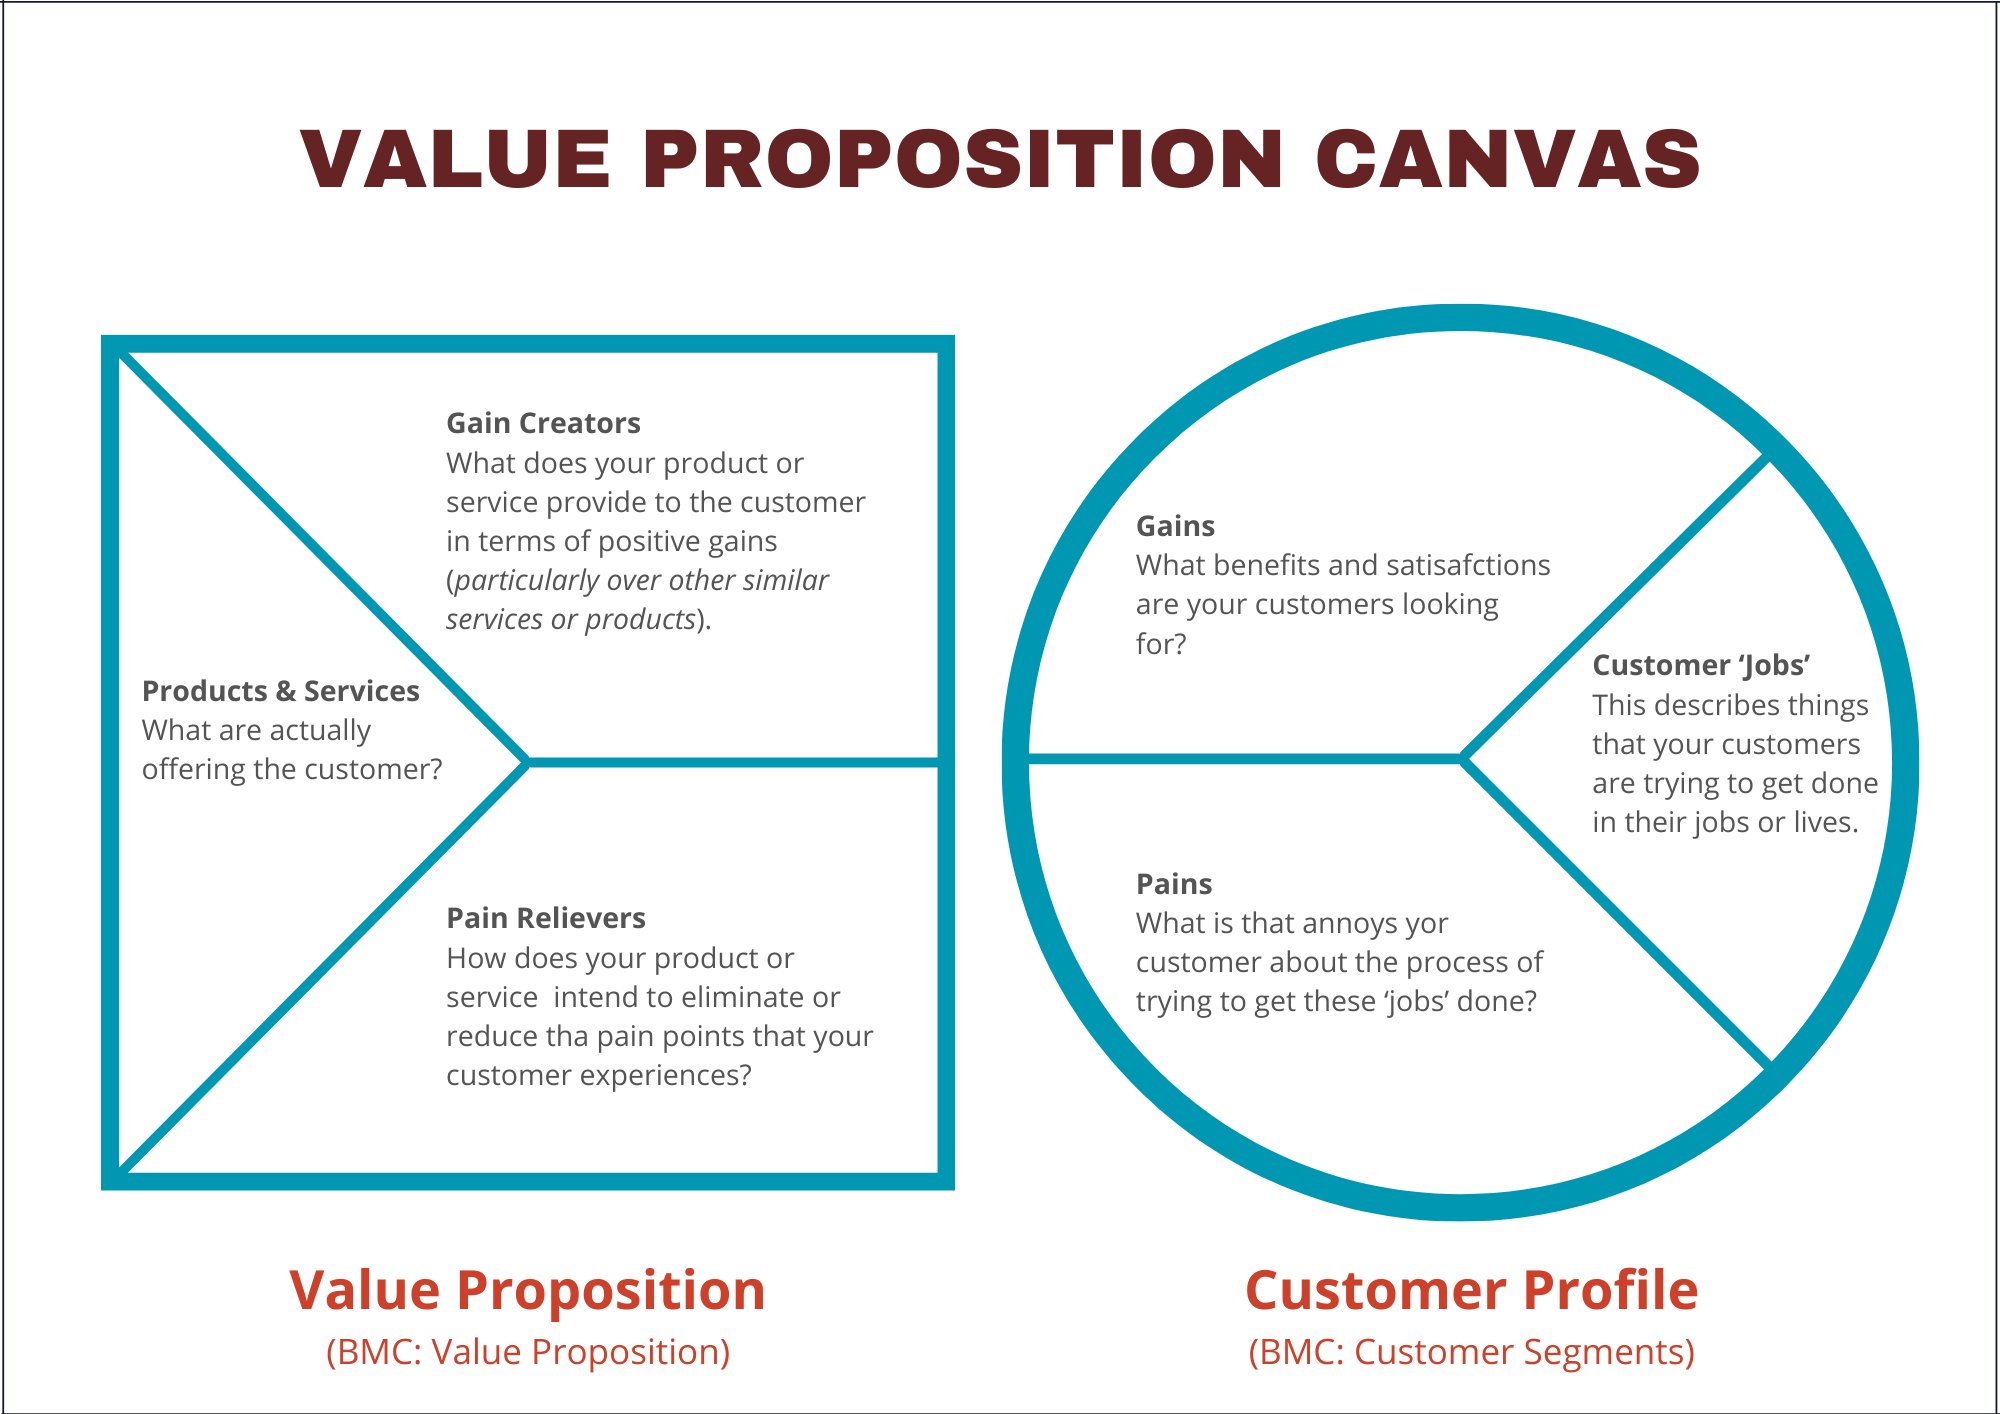 An image that shows the layout of the Value Proposition Canvas.